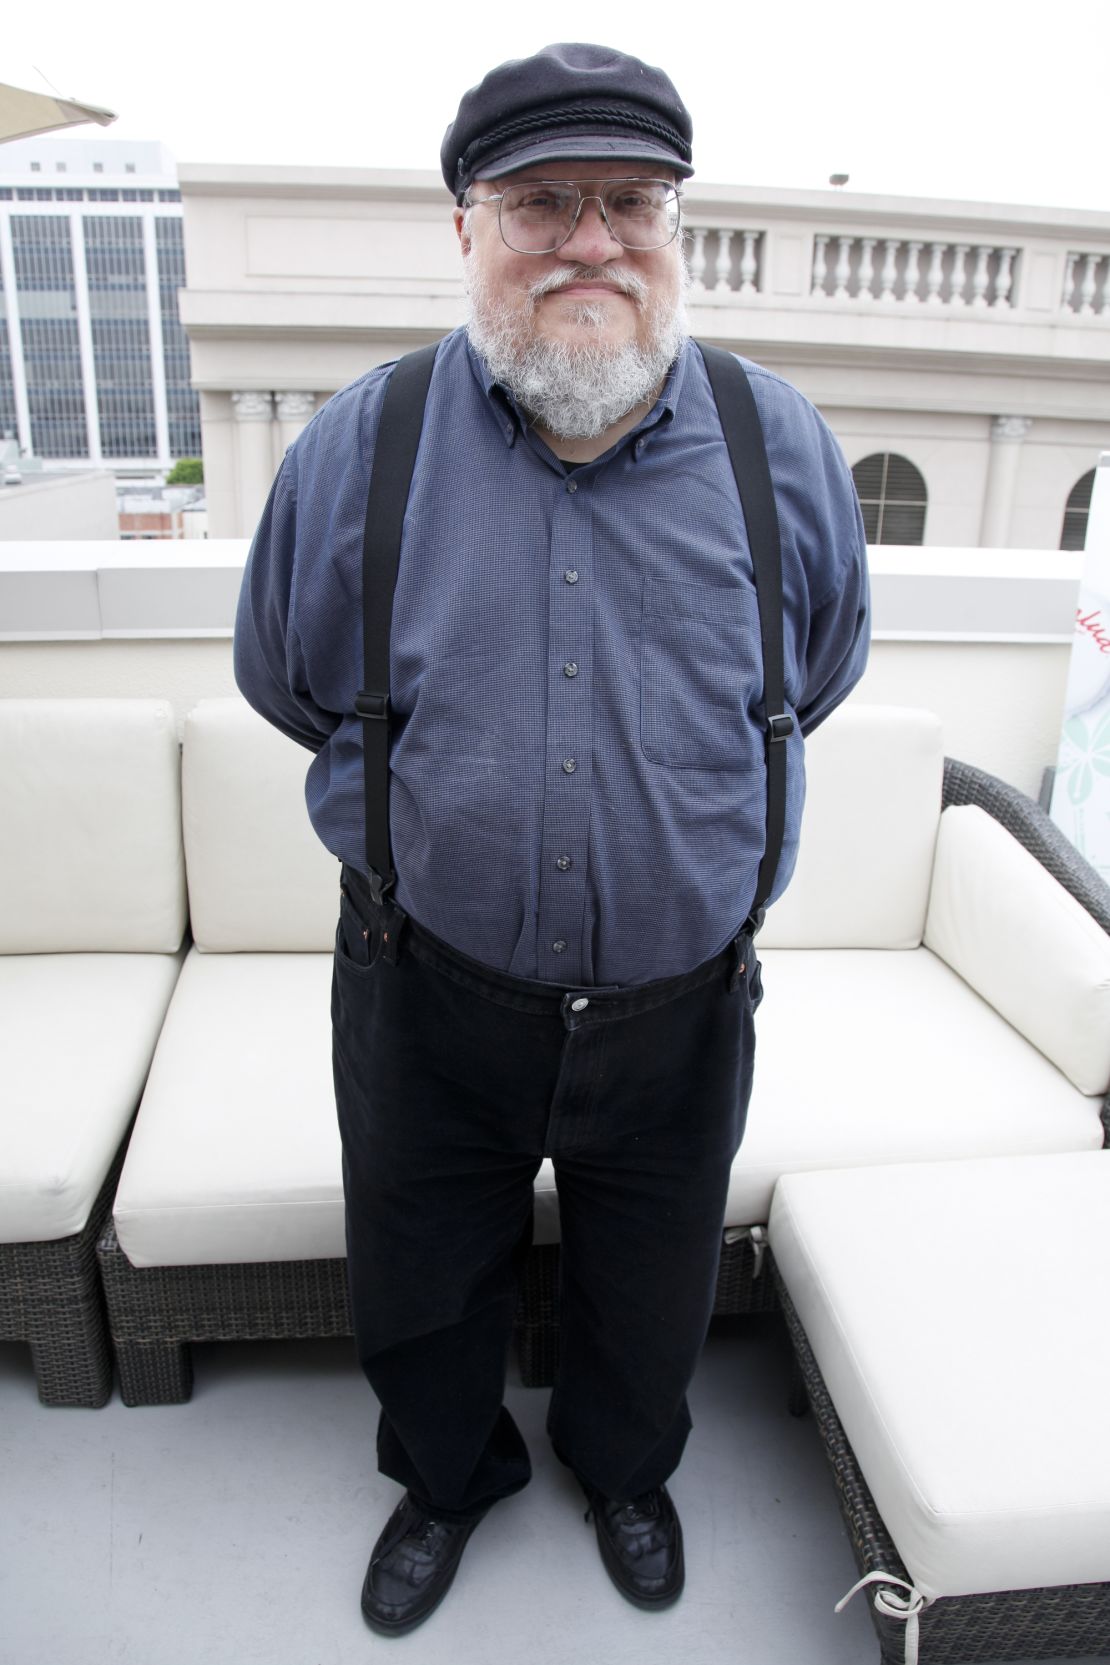 George R.R. Martin wrote a blog post titled "Corporate Cowardice."